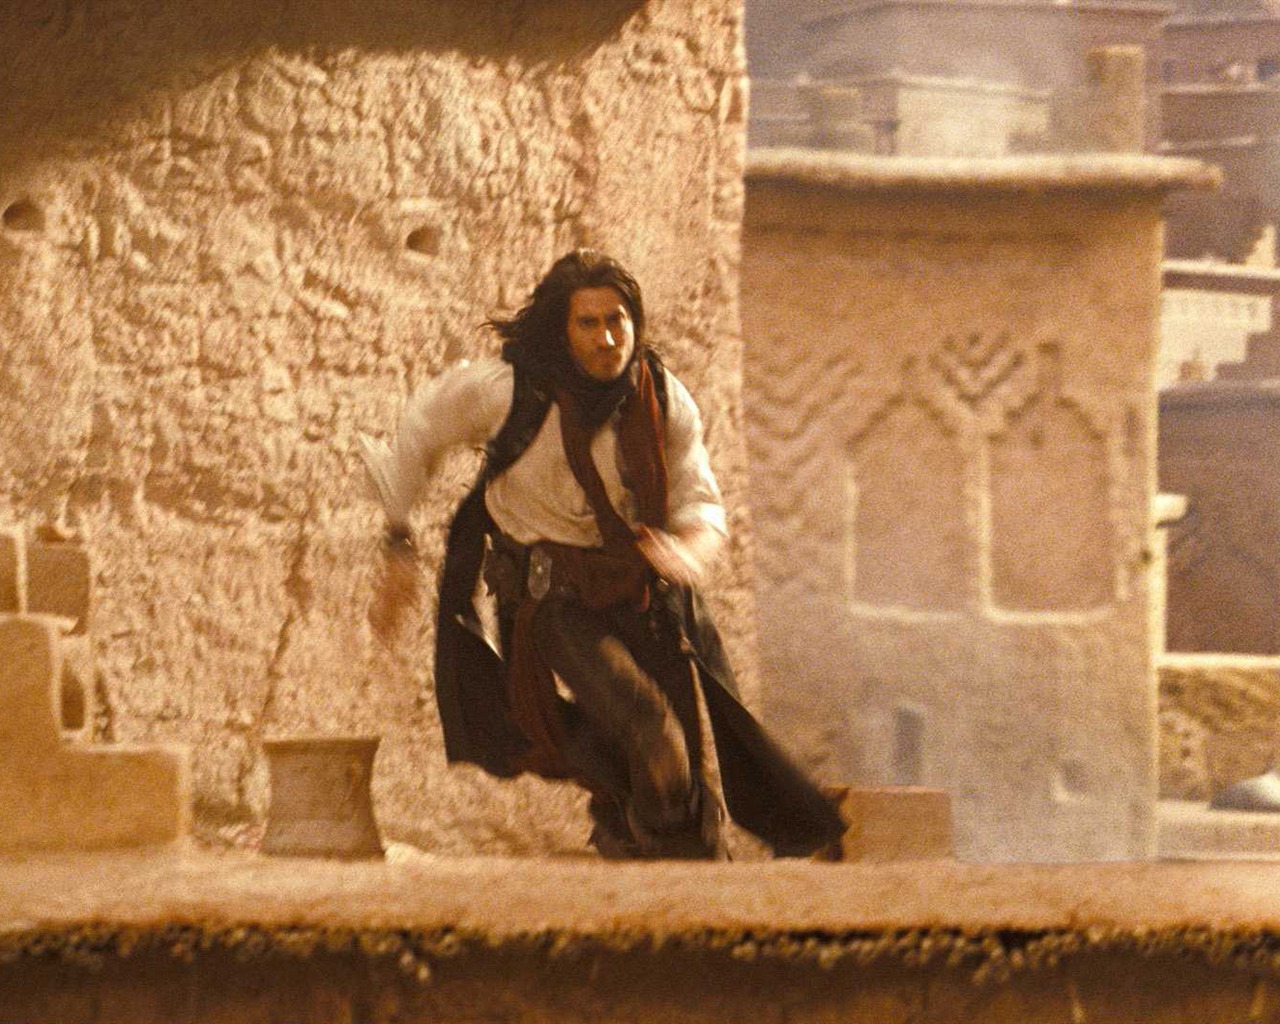 Prince of Persia The Sands of Time 波斯王子：时之刃34 - 1280x1024